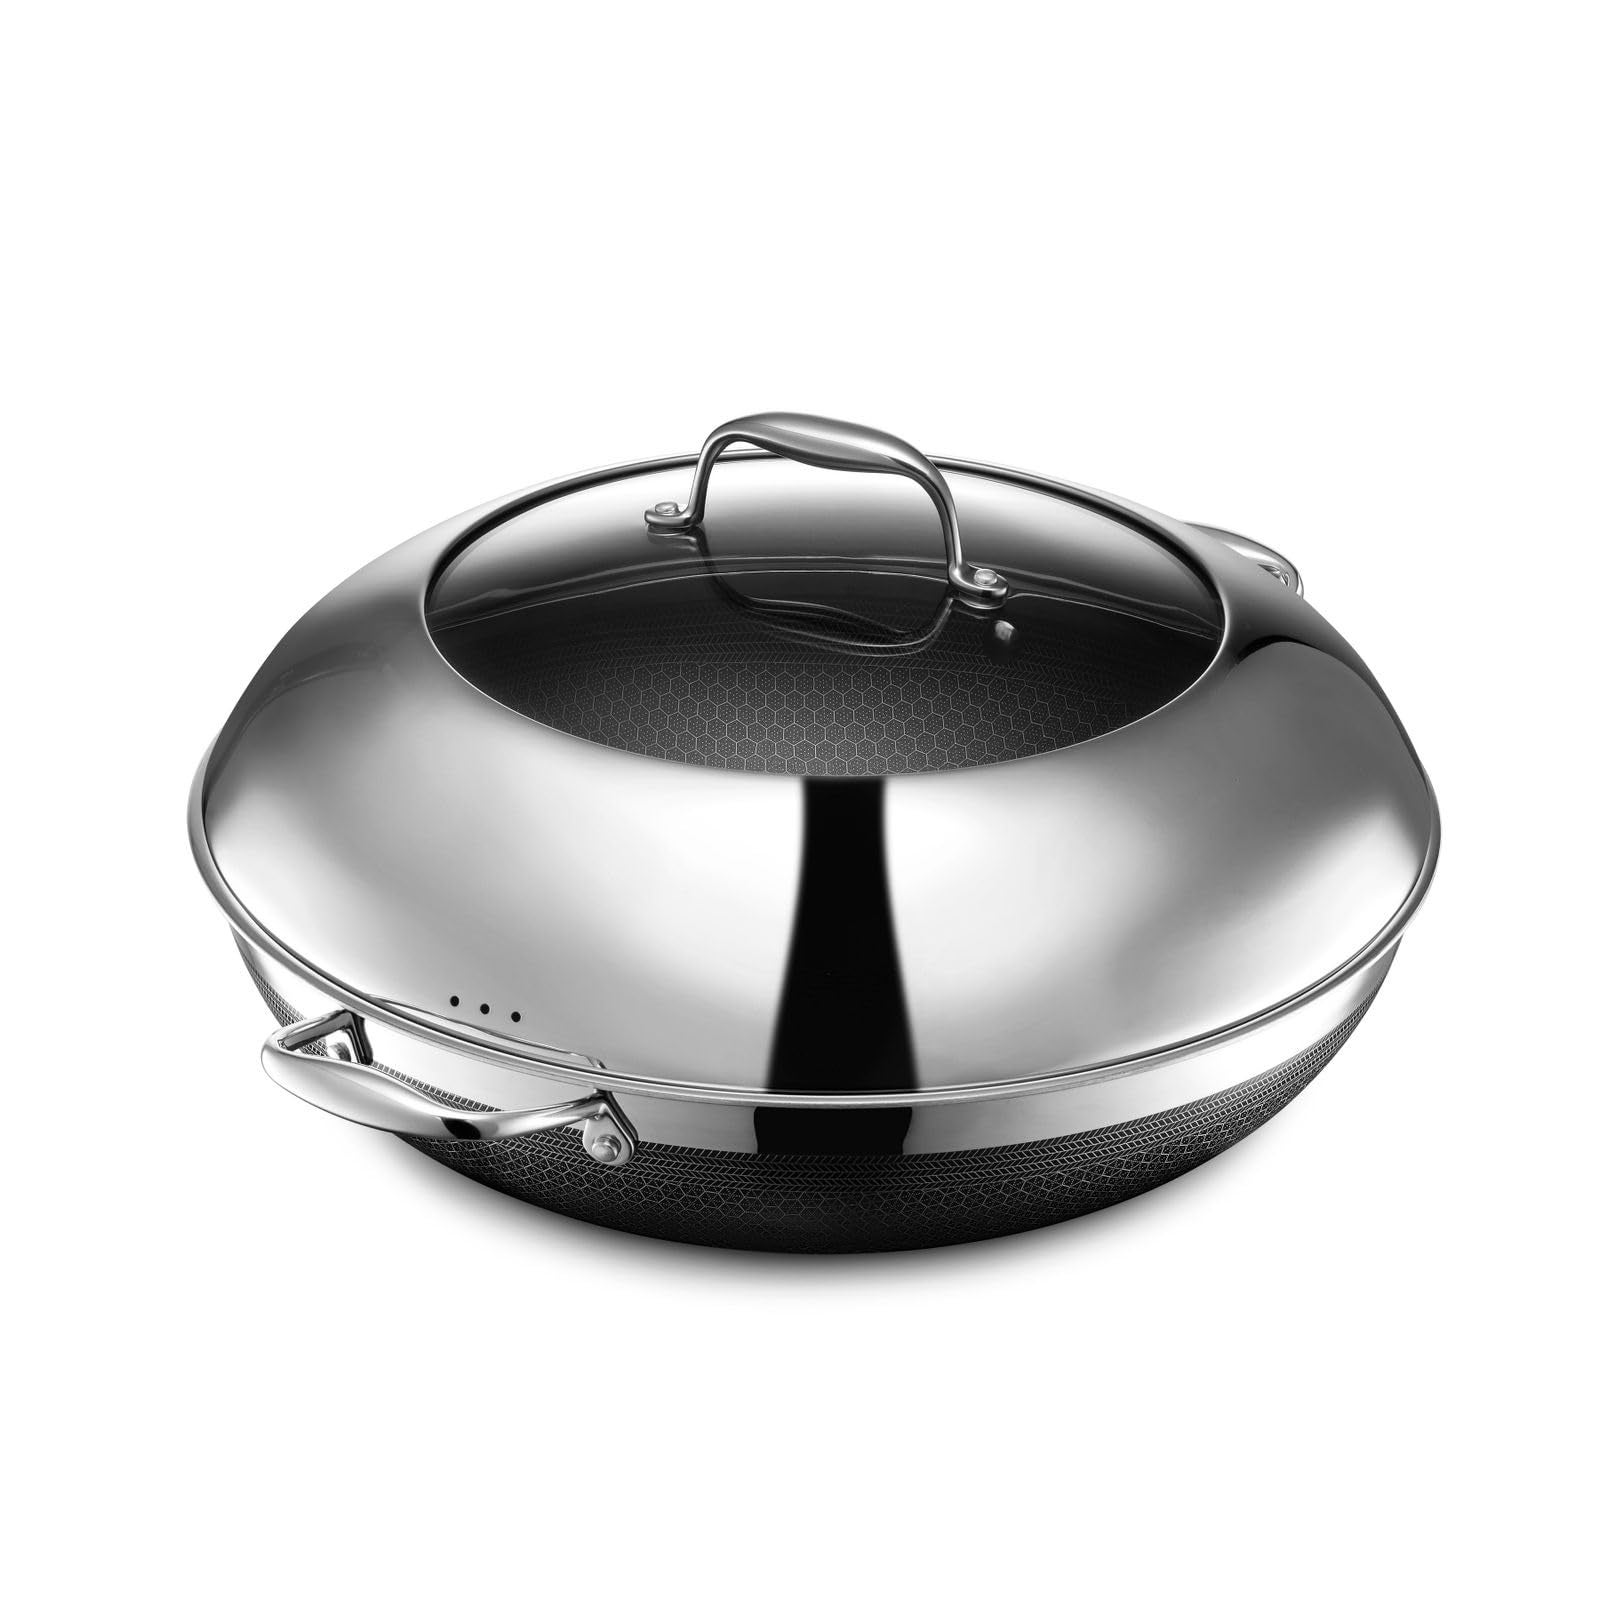 HexClad 12 Inch Hybrid Stainless Steel Frying Pan and Glass